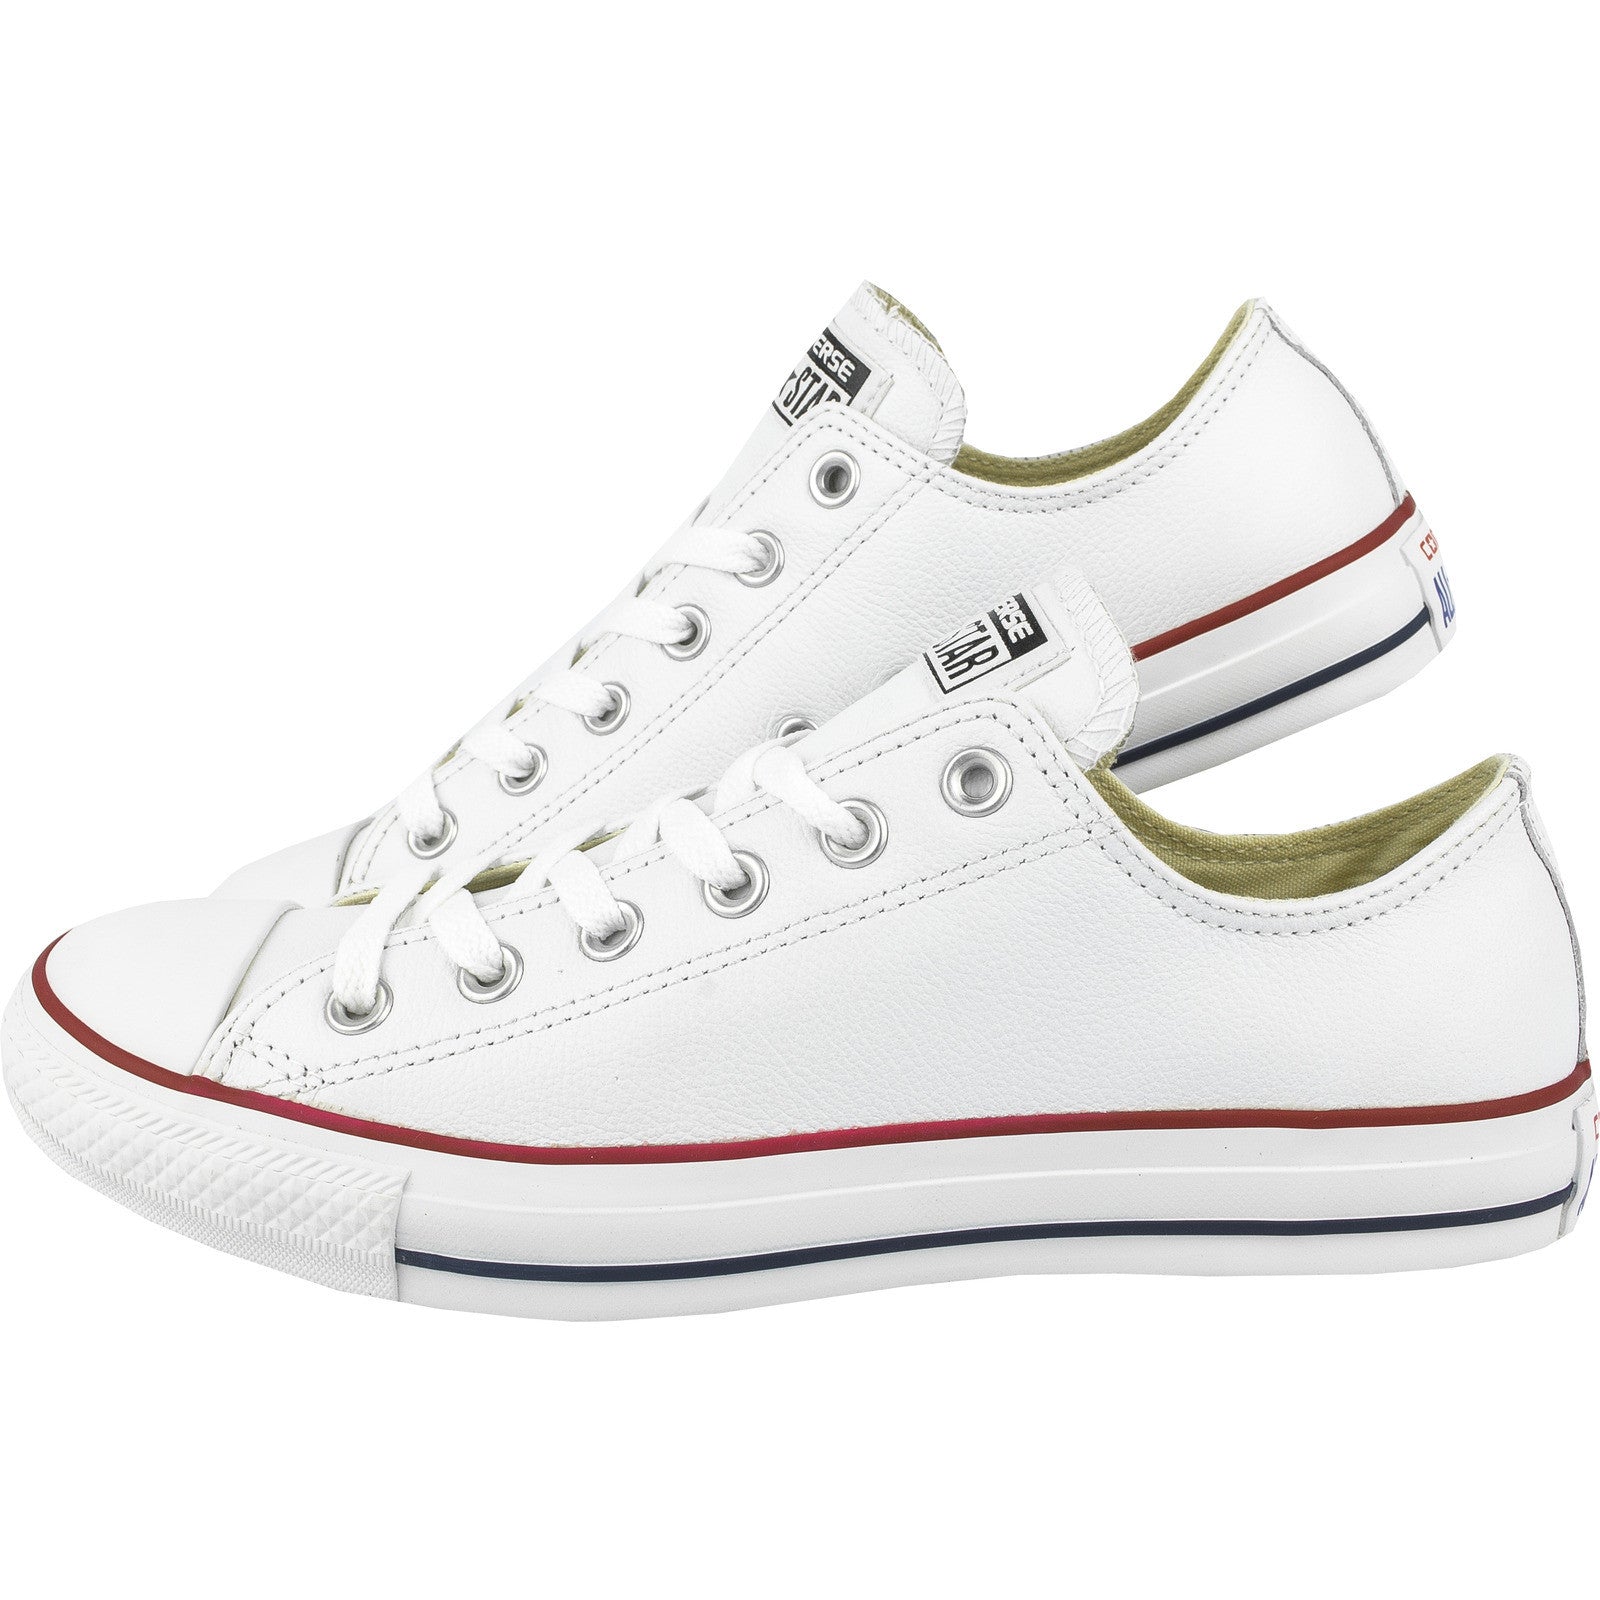 Converse Leather Chuck Taylor Ox Optical White Low 132173 – Famous Rock ...